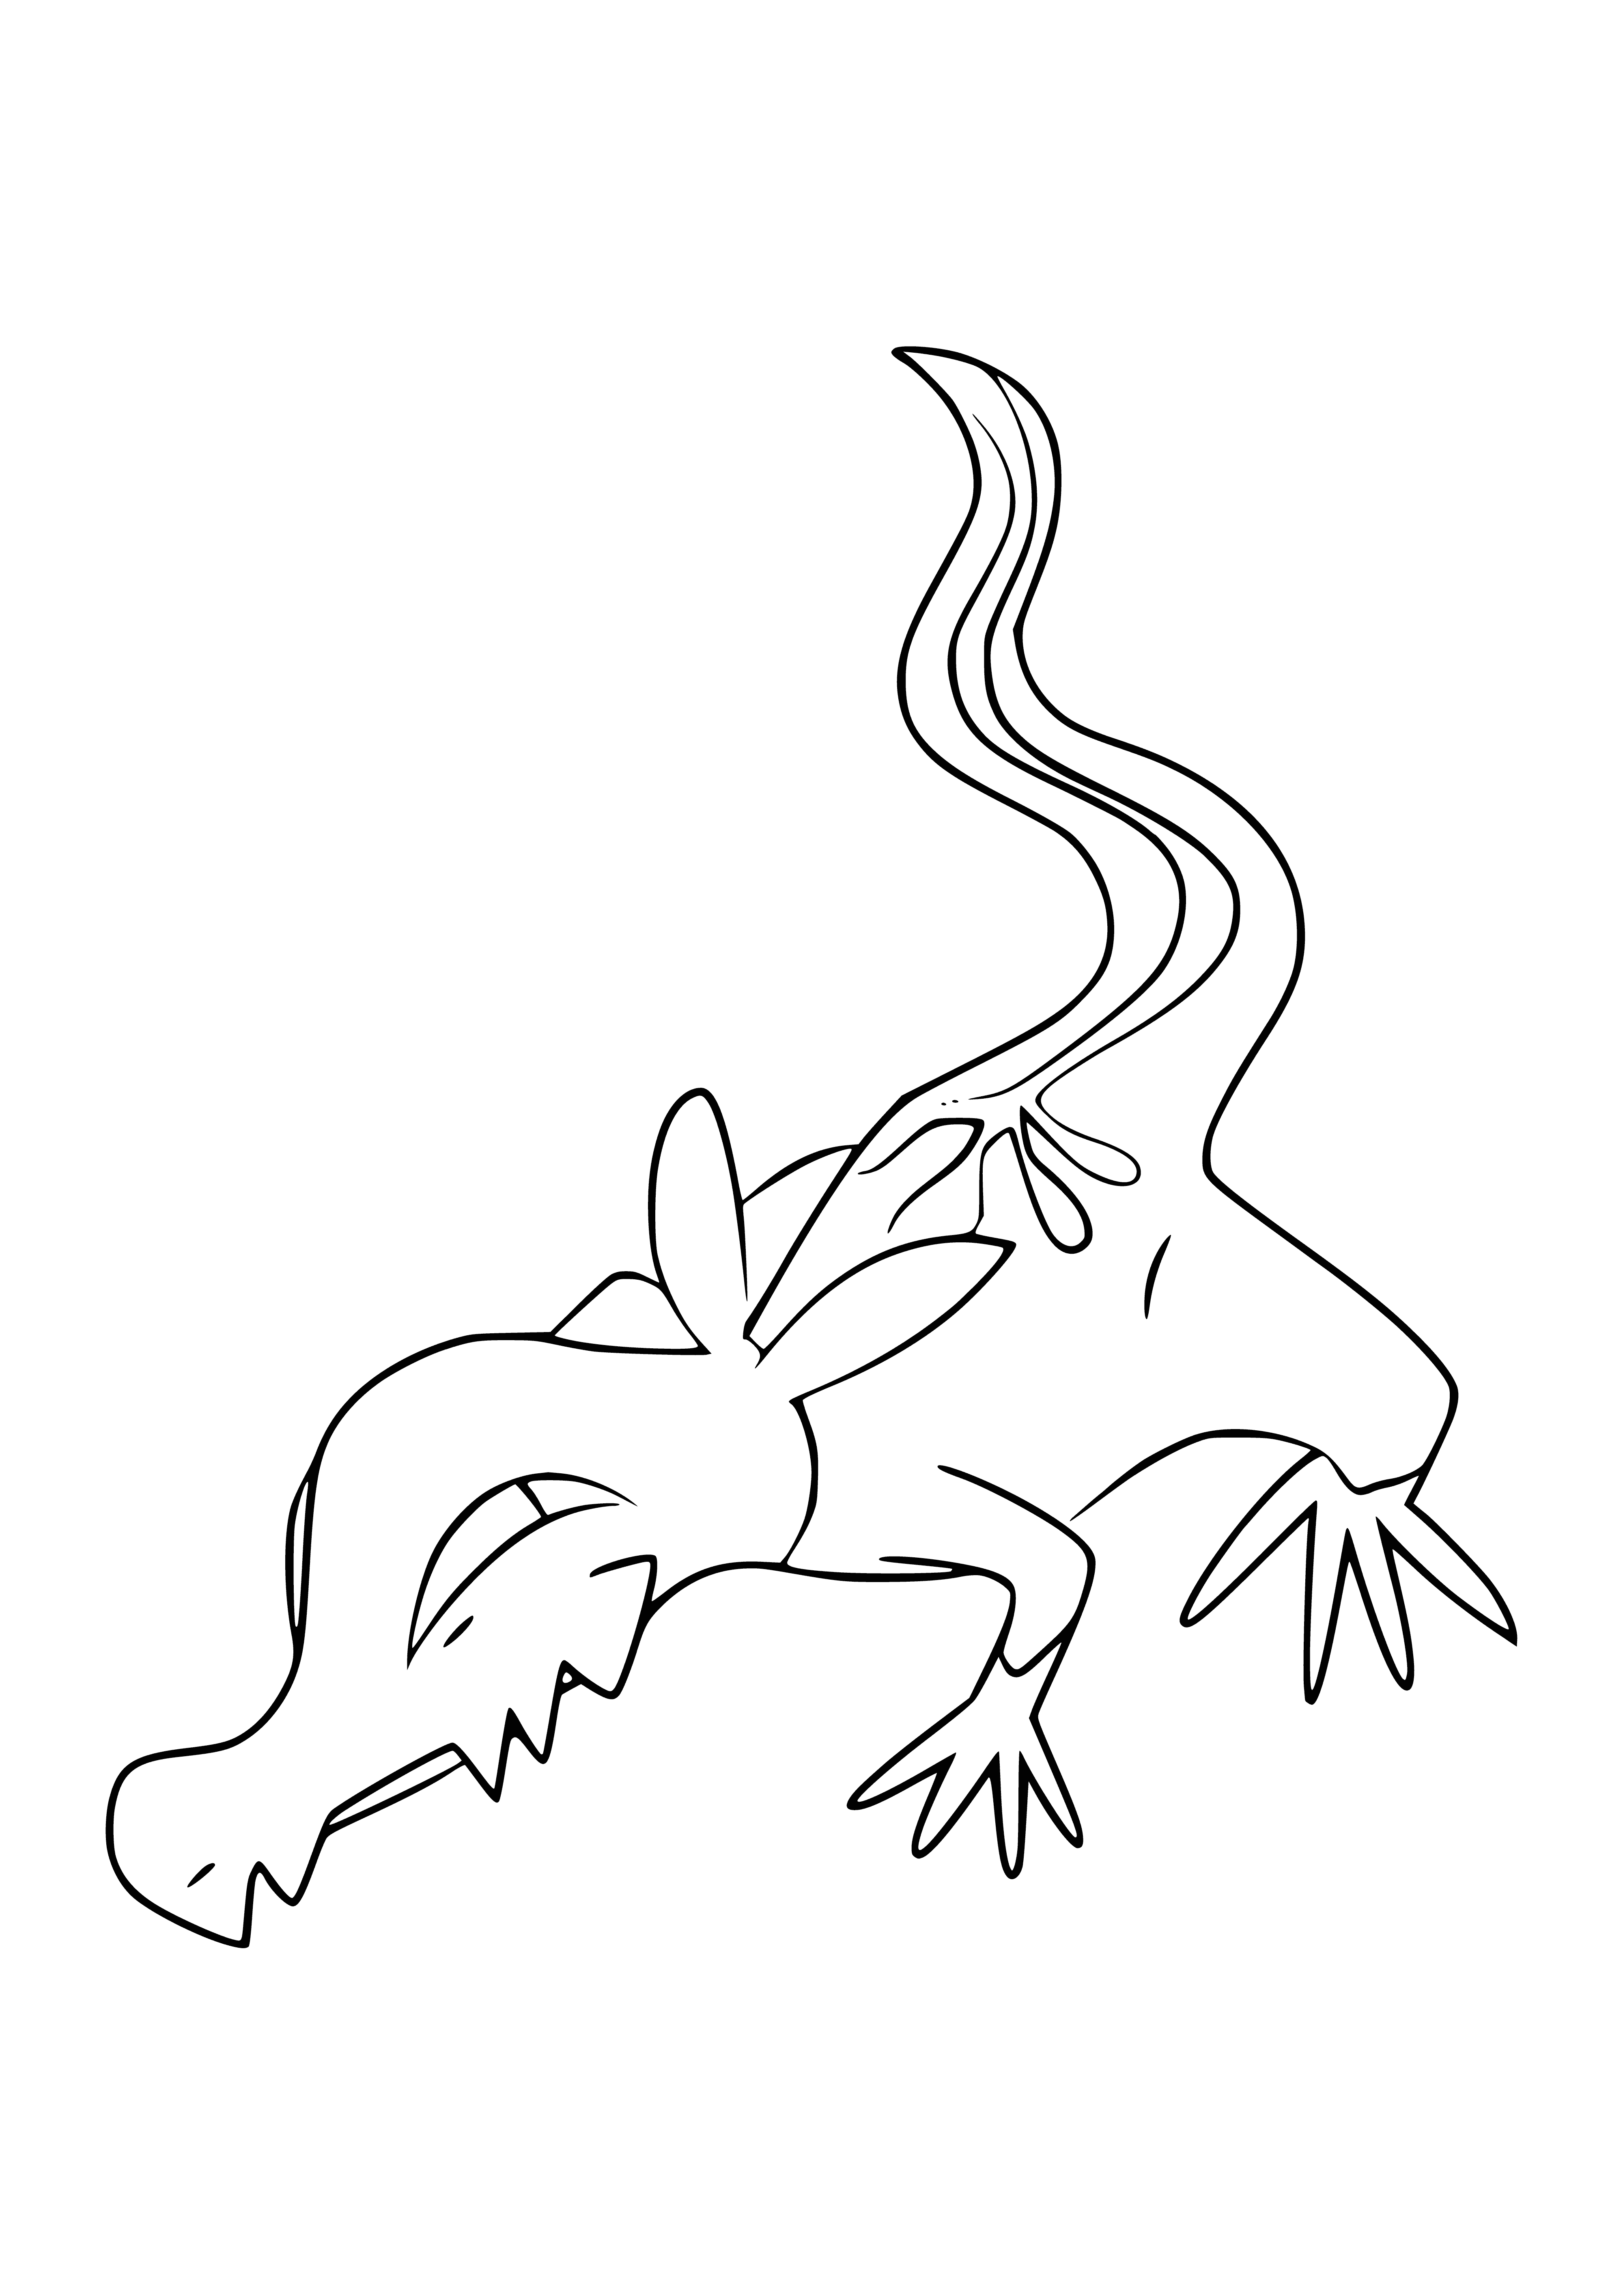 coloring page: Poké with black and orange lizard body, long tail, small eyes, hands and feet. It's Salandit!